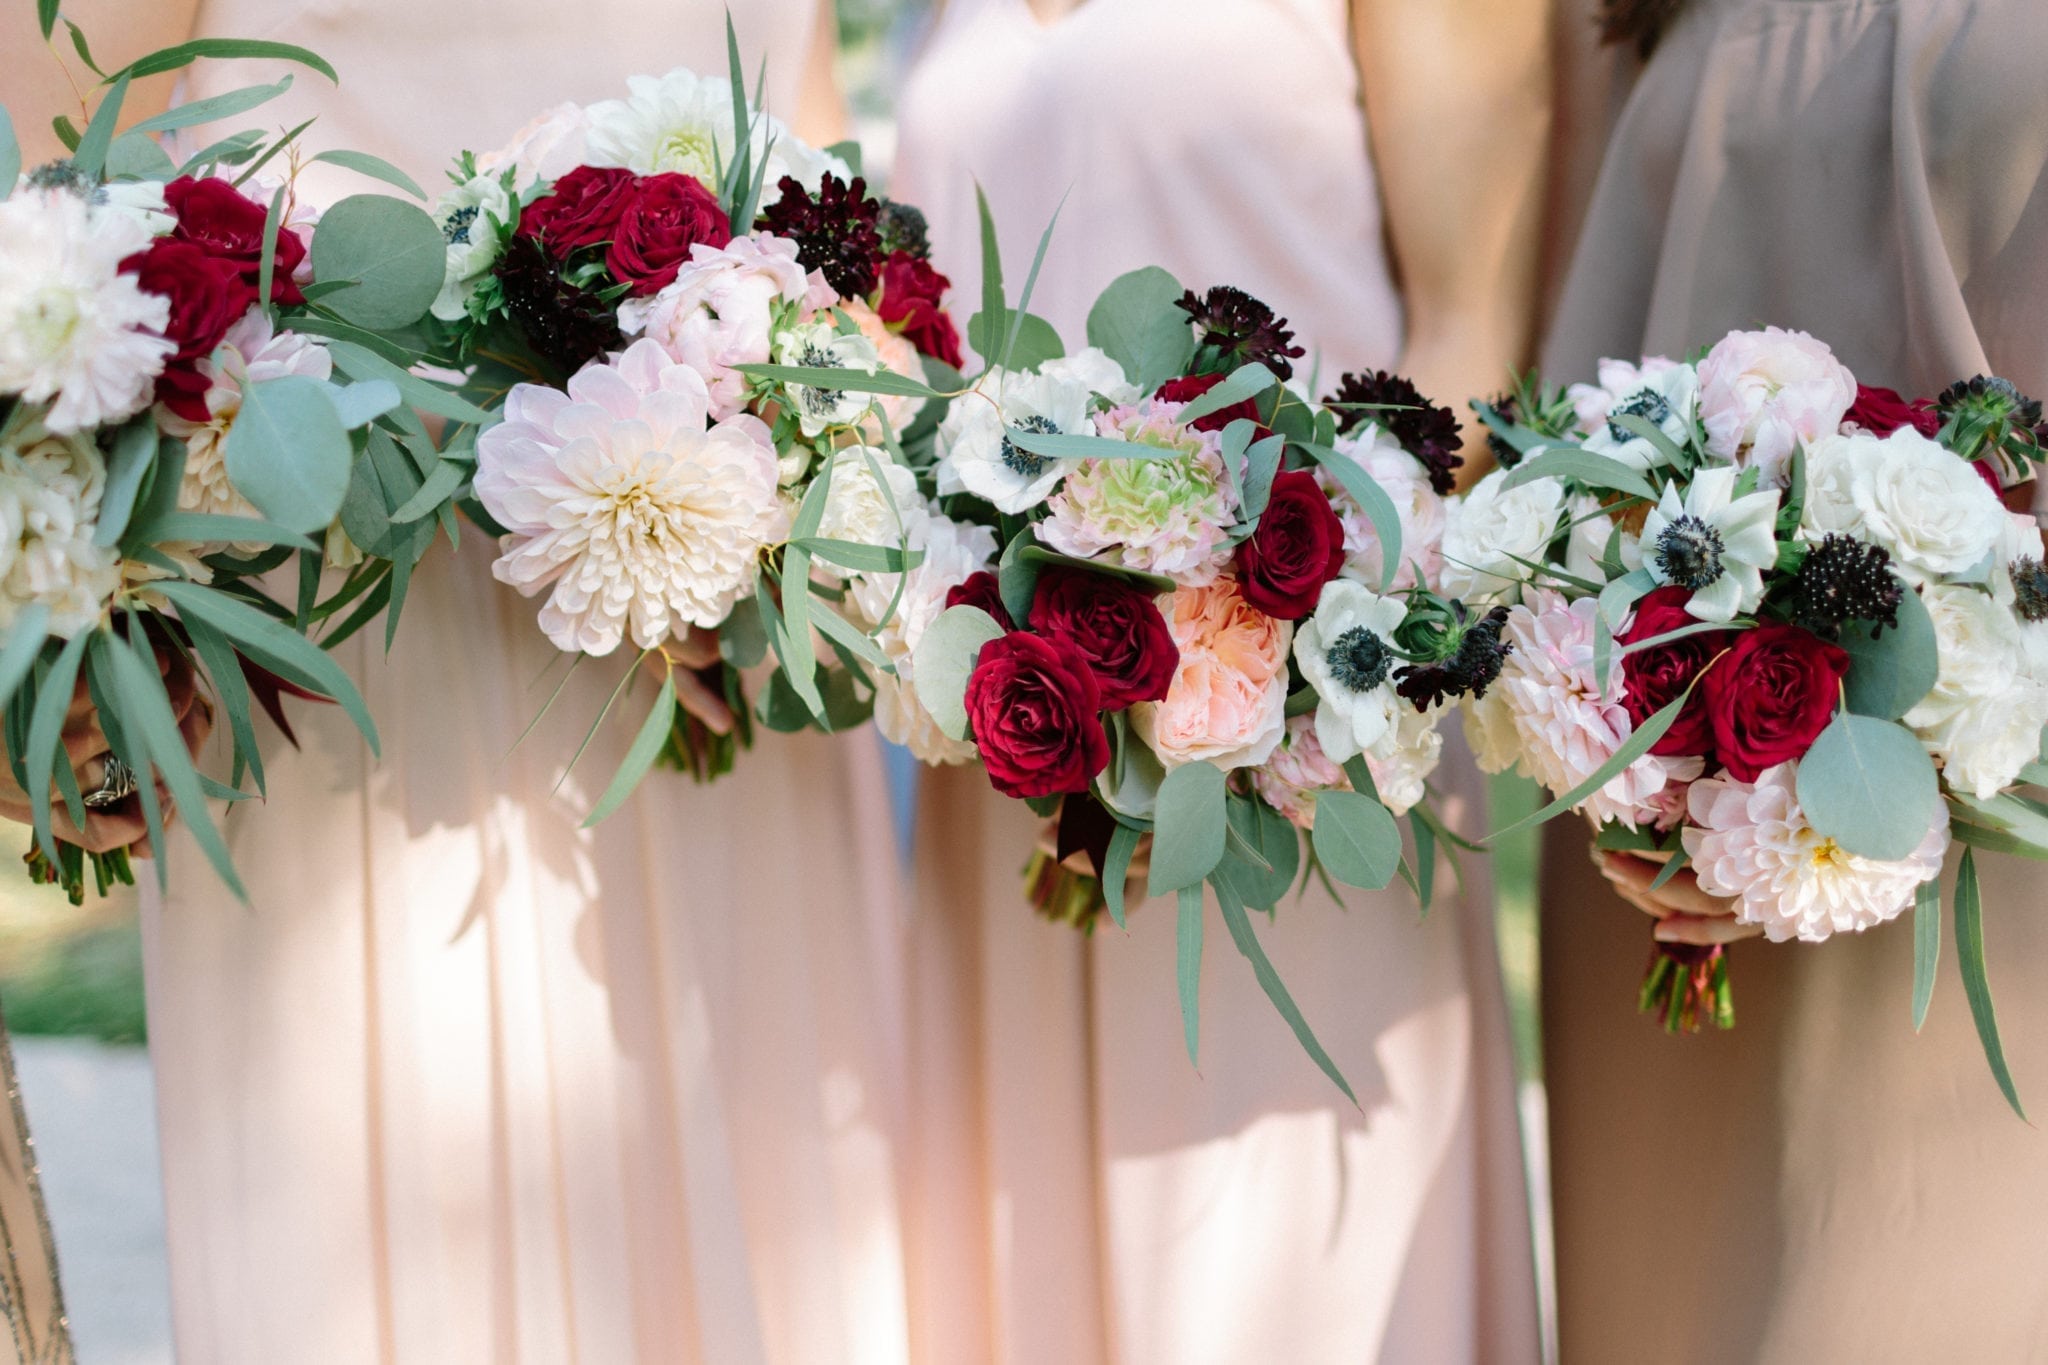 blush, pale pink, dark burgundy tones and greenery bridesmaid bouquets for new orleans fall wedding by kim starr wise floral events